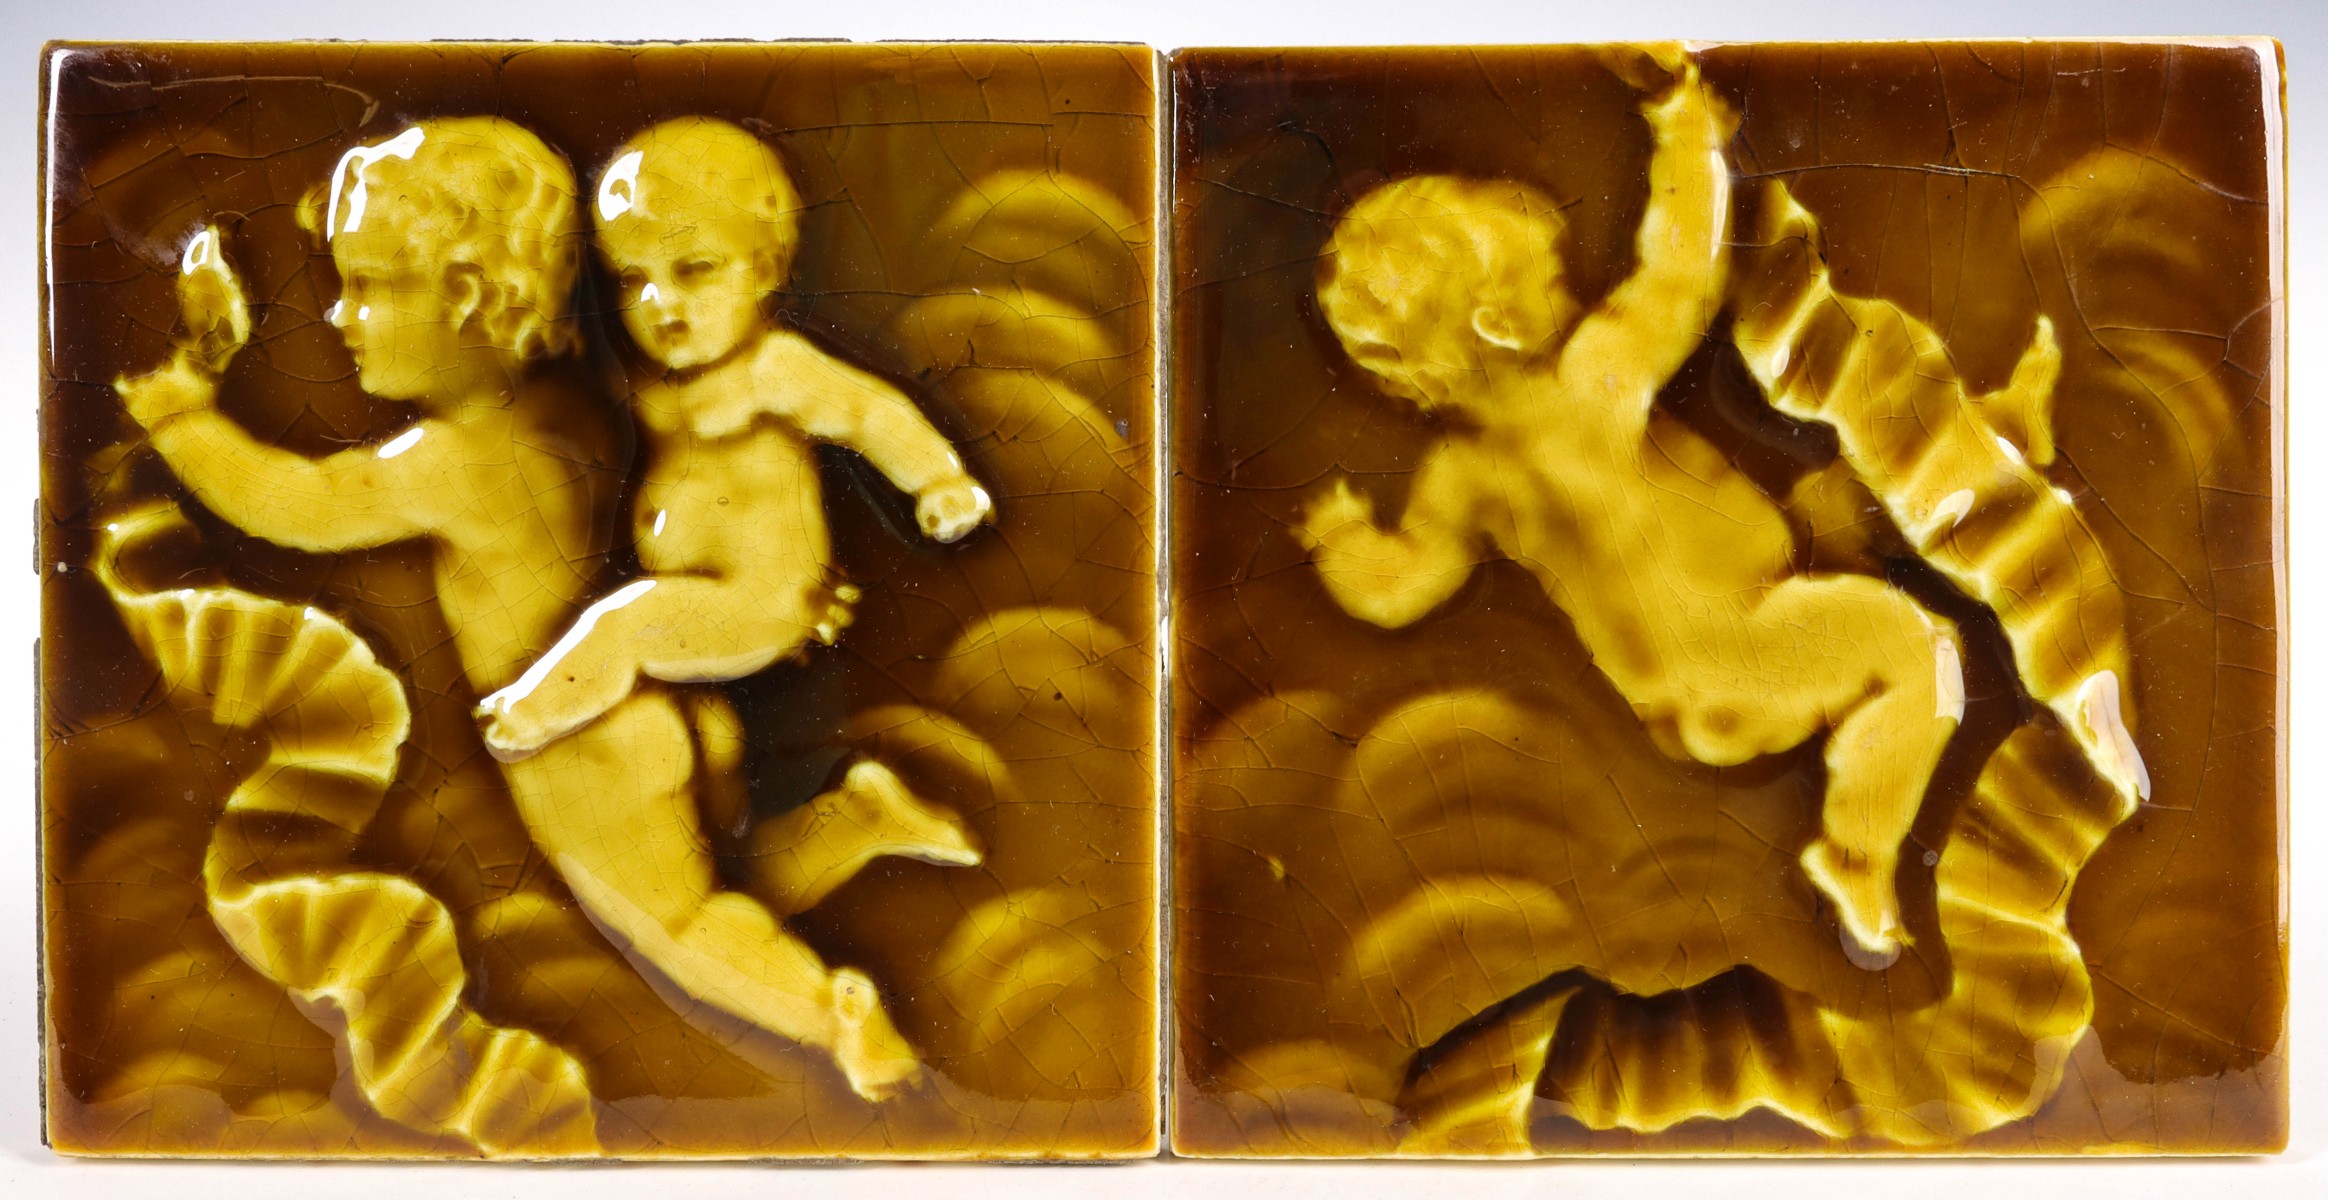 TWO TRENT TILE CO. ART POTTERY FIREPLACE TILES